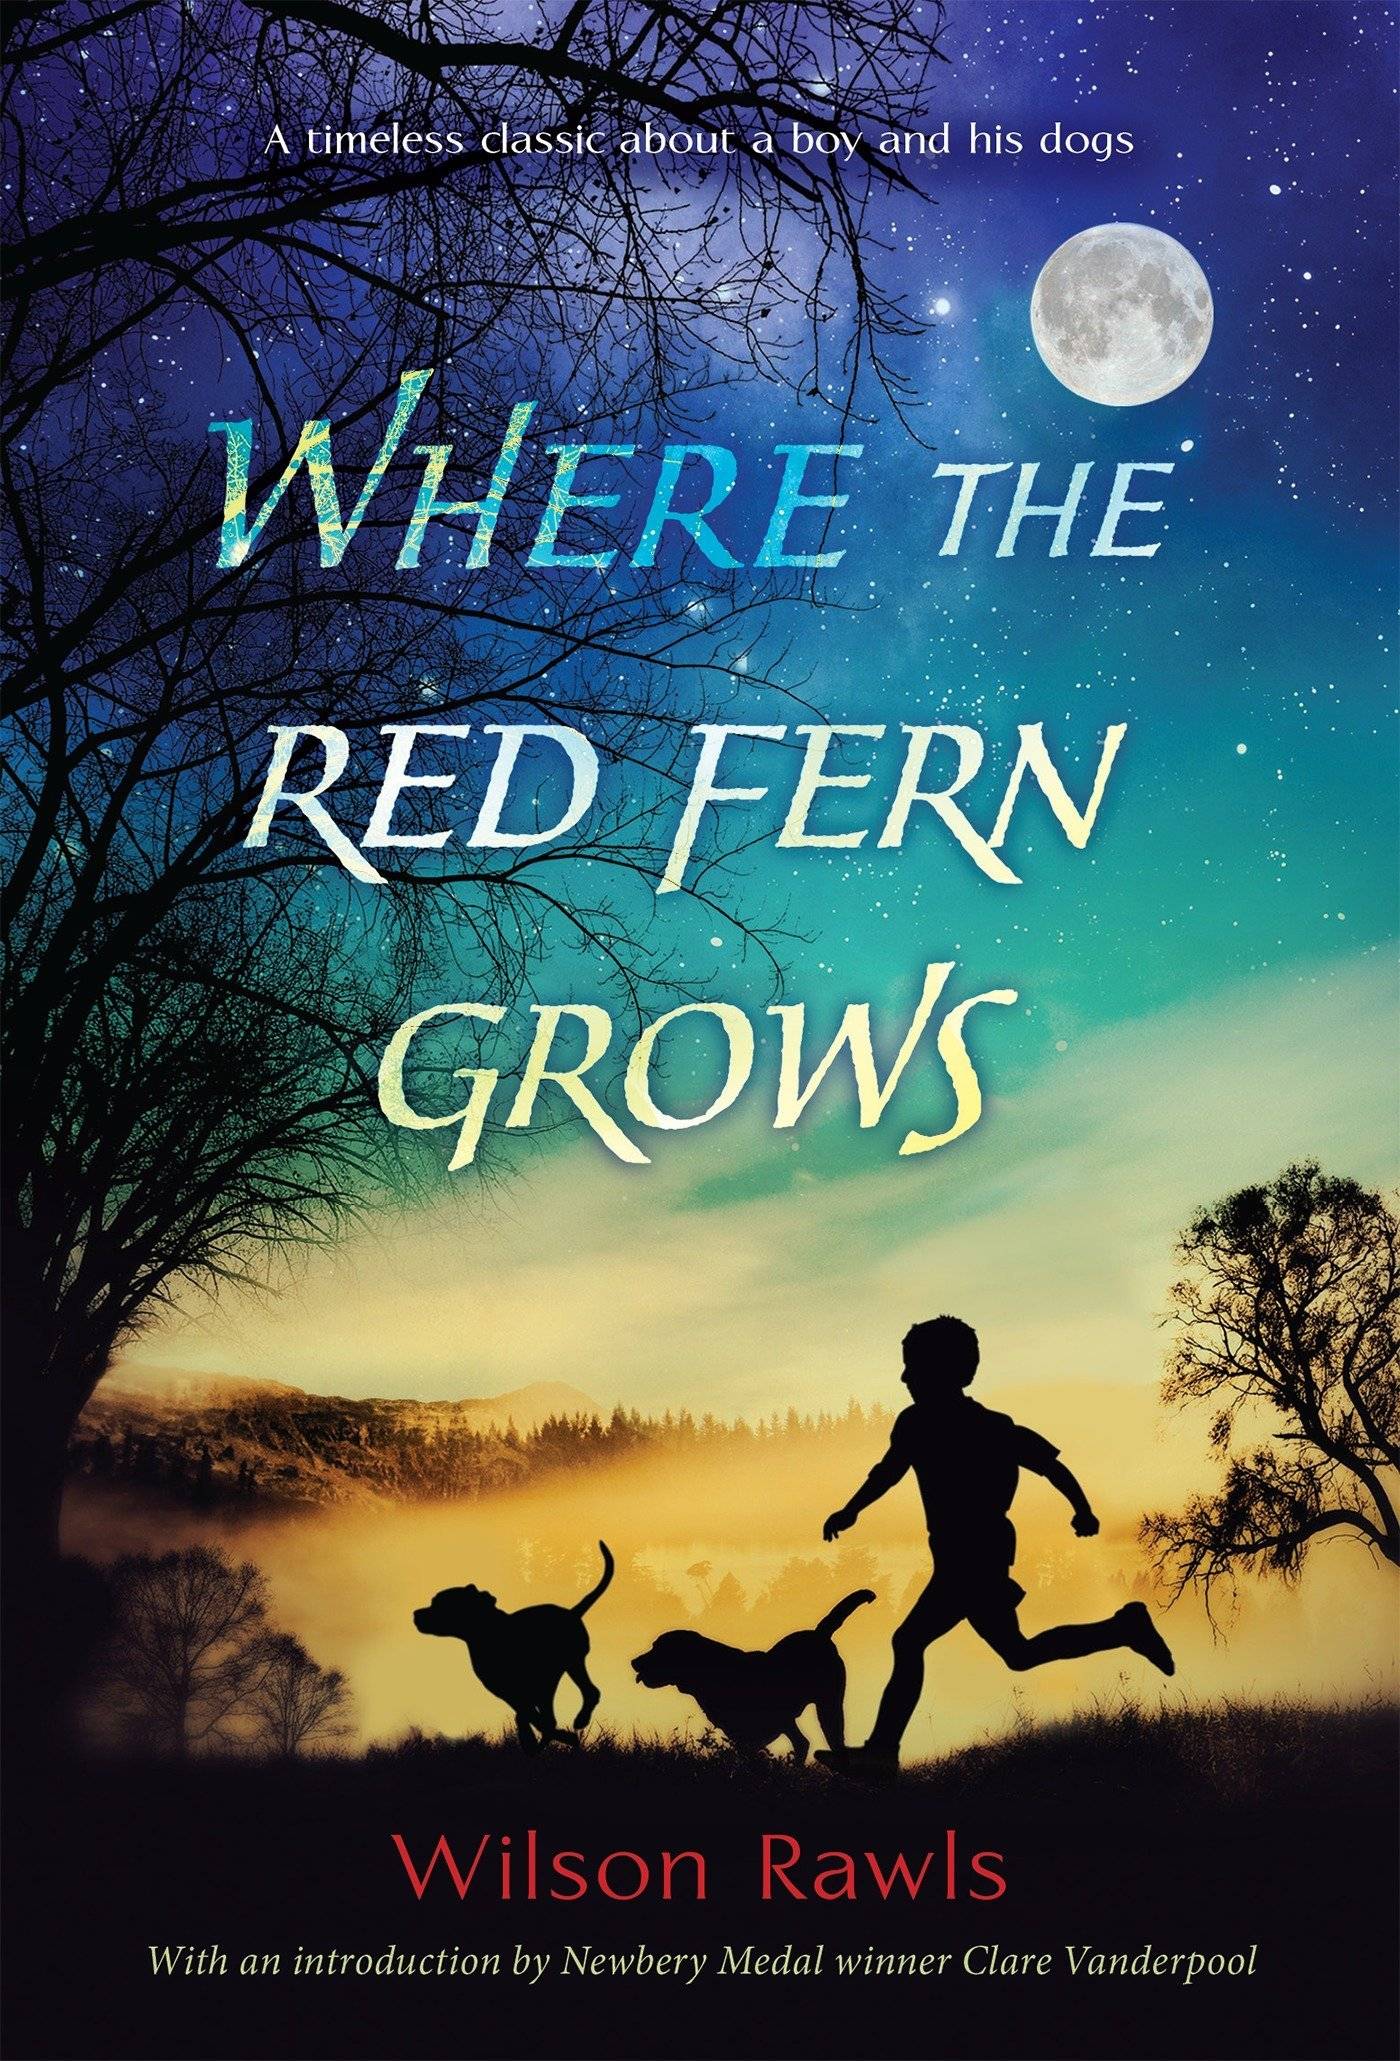 IMG : Where The Red Fern Grows